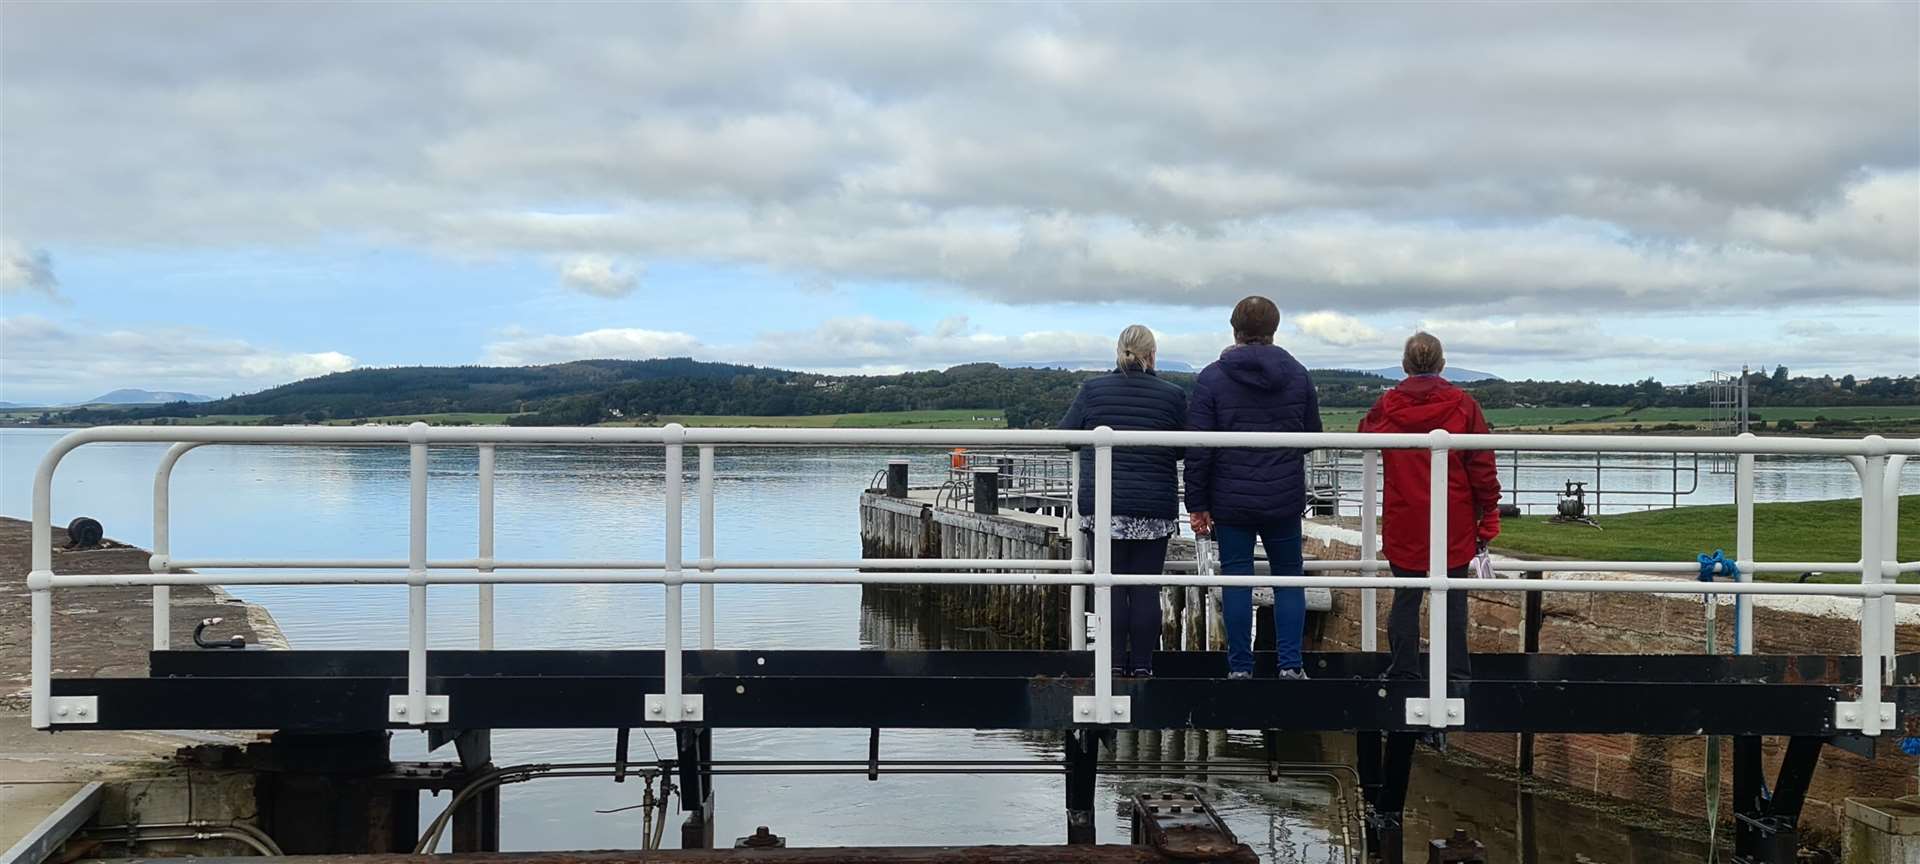 Enjoying the view at the end of the Caledonian Canal.